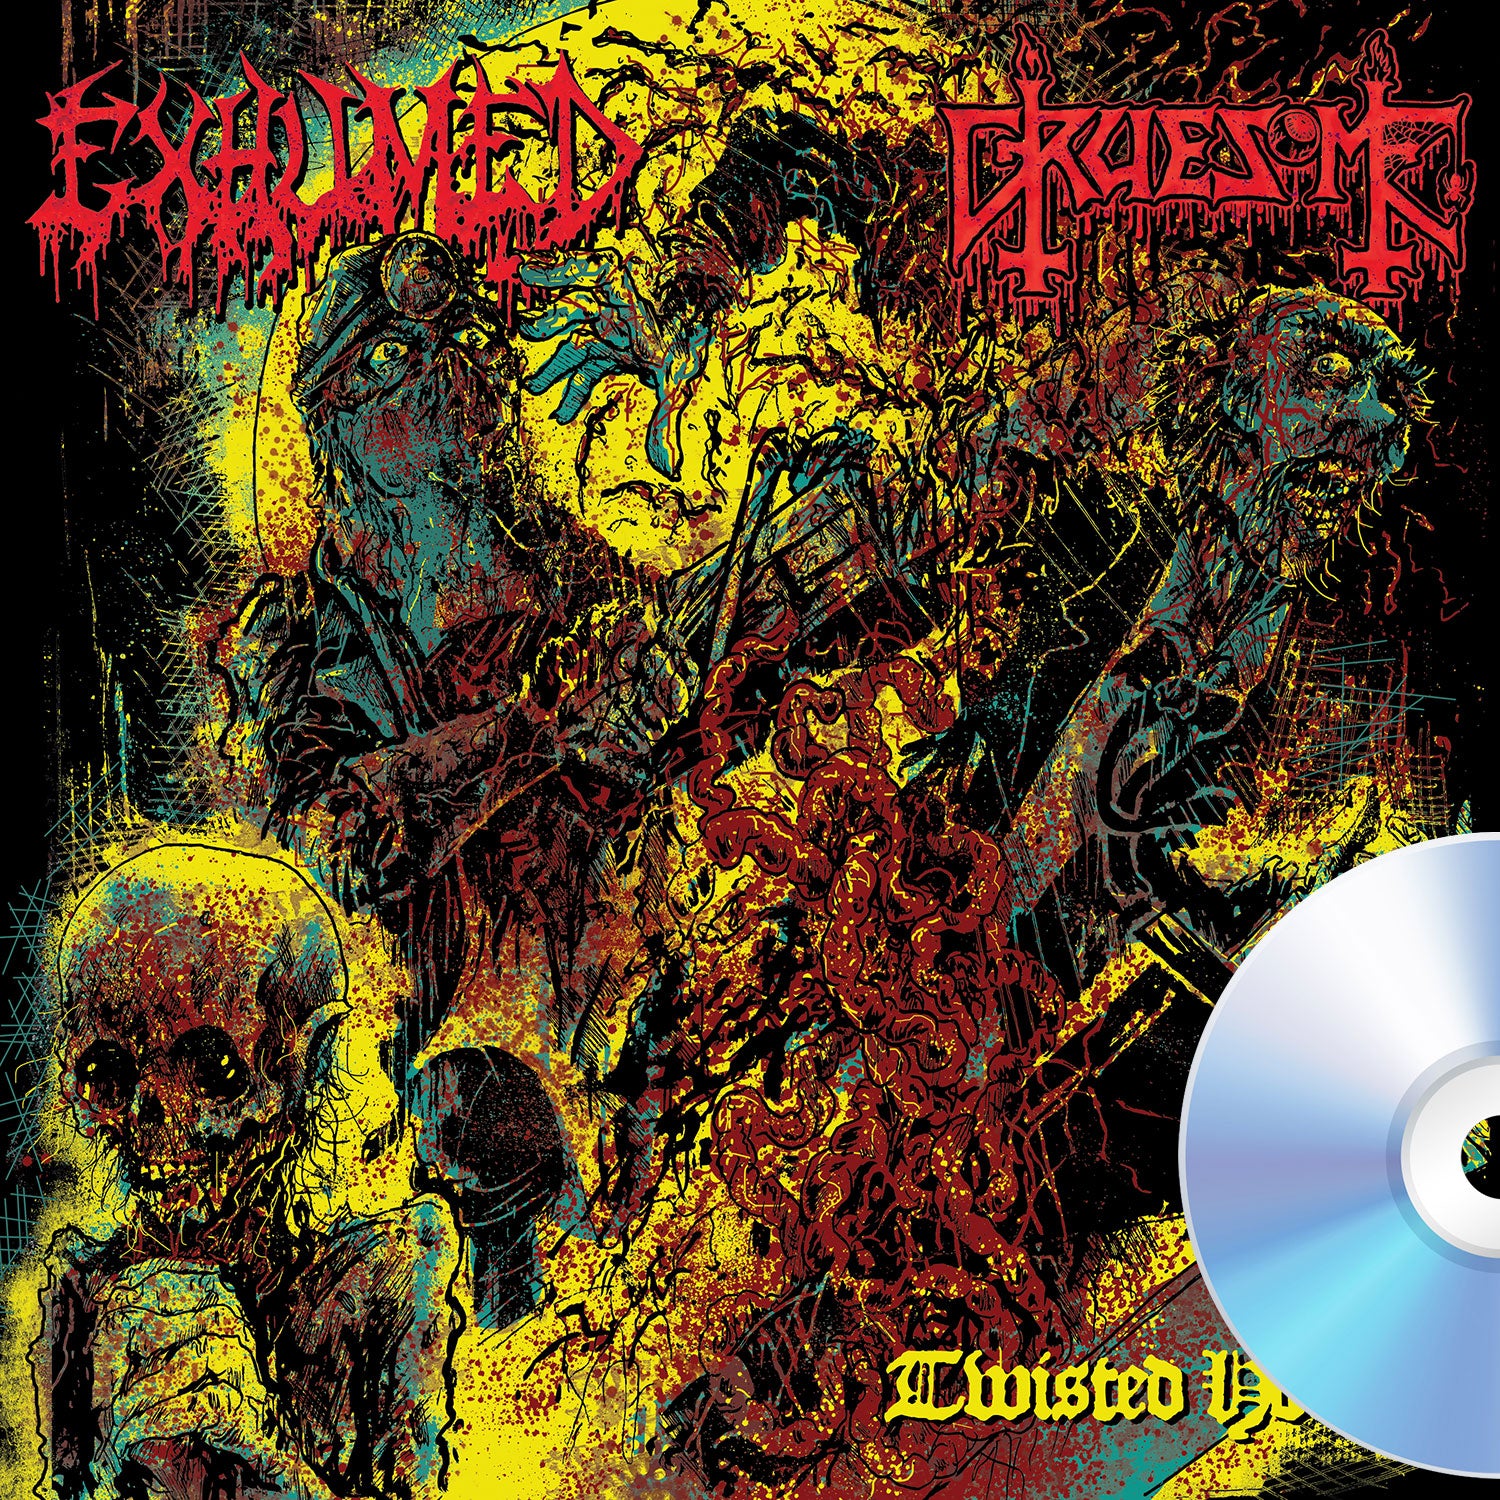 Exhumed / Gruesome "Twisted Horror" CD